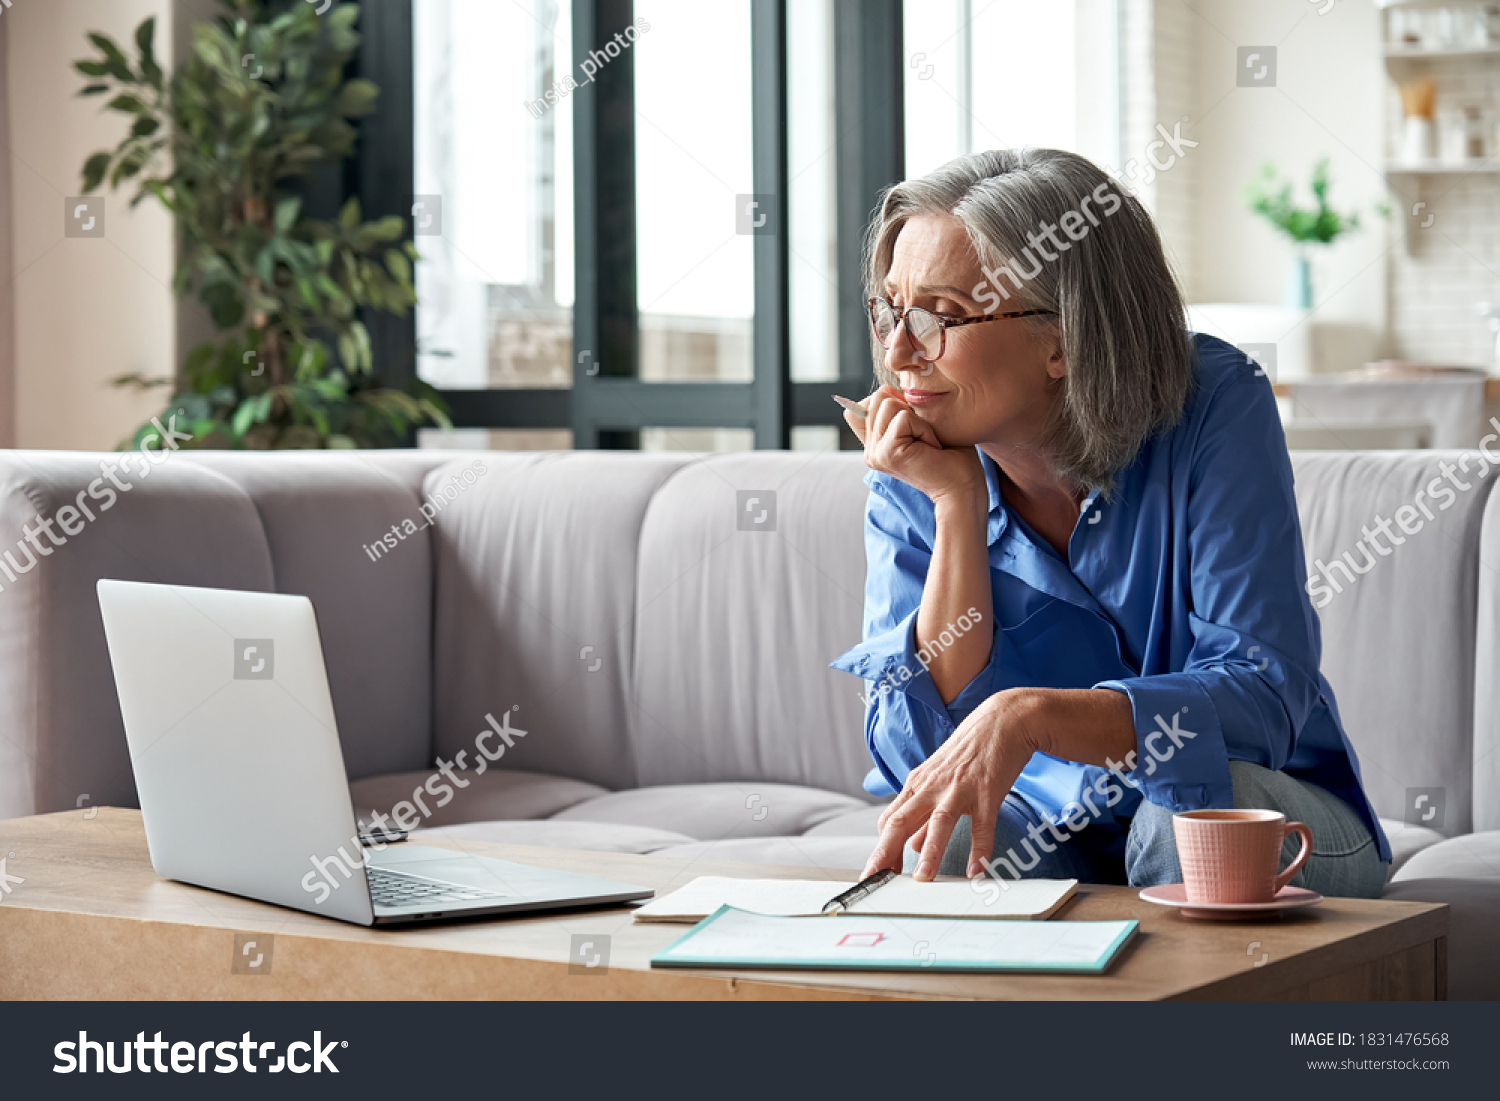 Senior mature older woman watching business training, online webinar on laptop computer remote working or social distance learning from home. 60s businesswoman video conference calling in virtual chat #1831476568